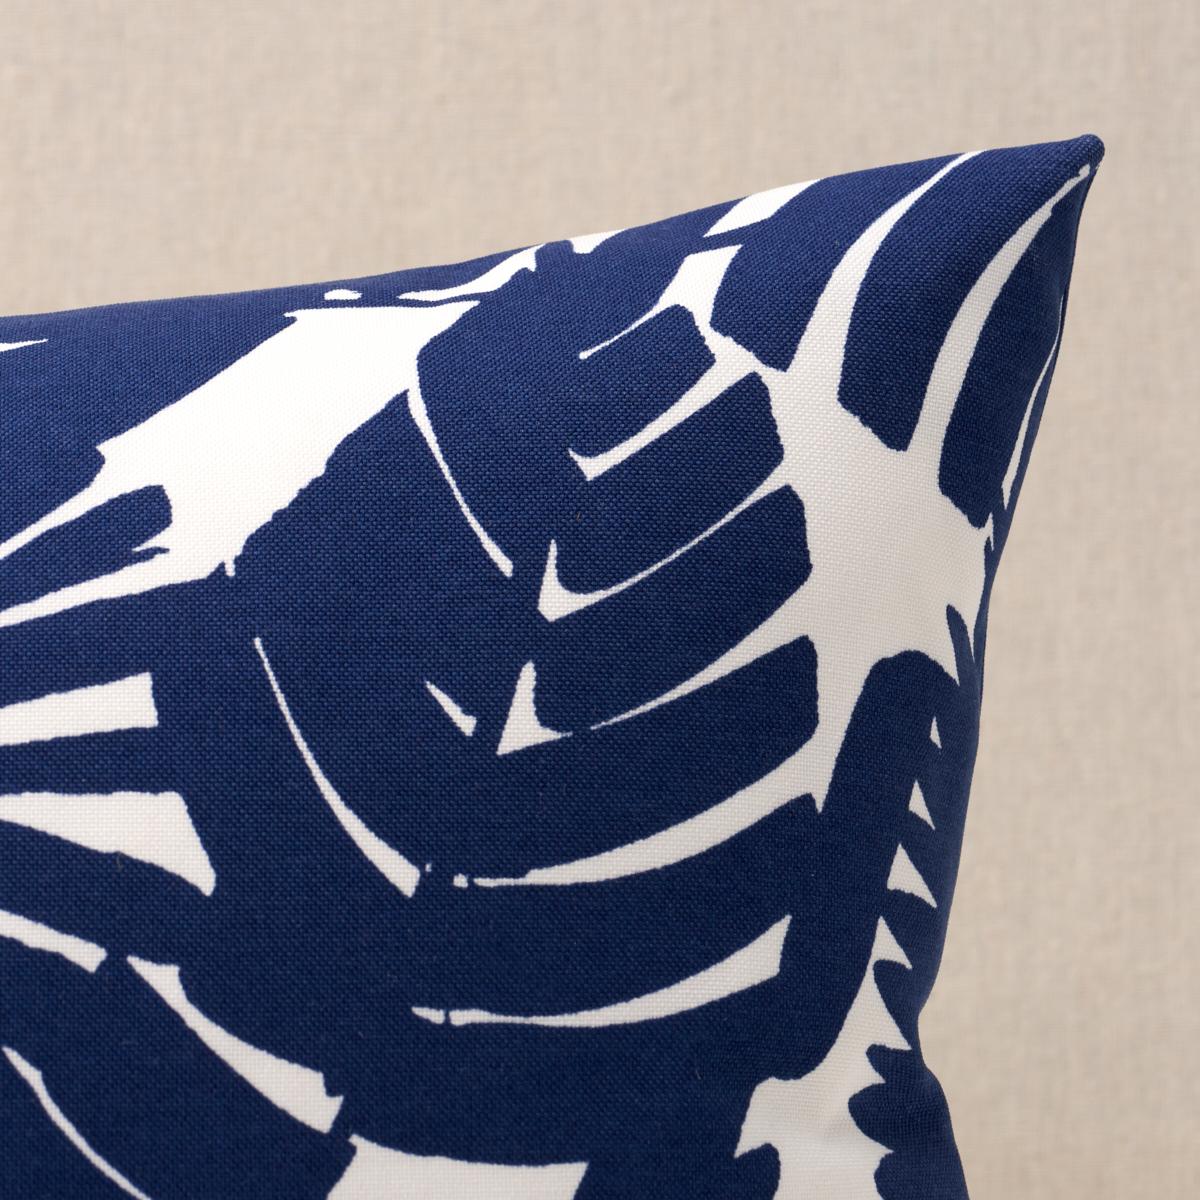 This pillow features Palisades Palm Print Indoor/Outdoor by Trina Turk with a knife edge finish. Featuring graphic silhouettes of tropical fronds, Palisades Palm Print Indoor/Outdoor fabric is a dense allover design by Trina Turk. Pillow includes a